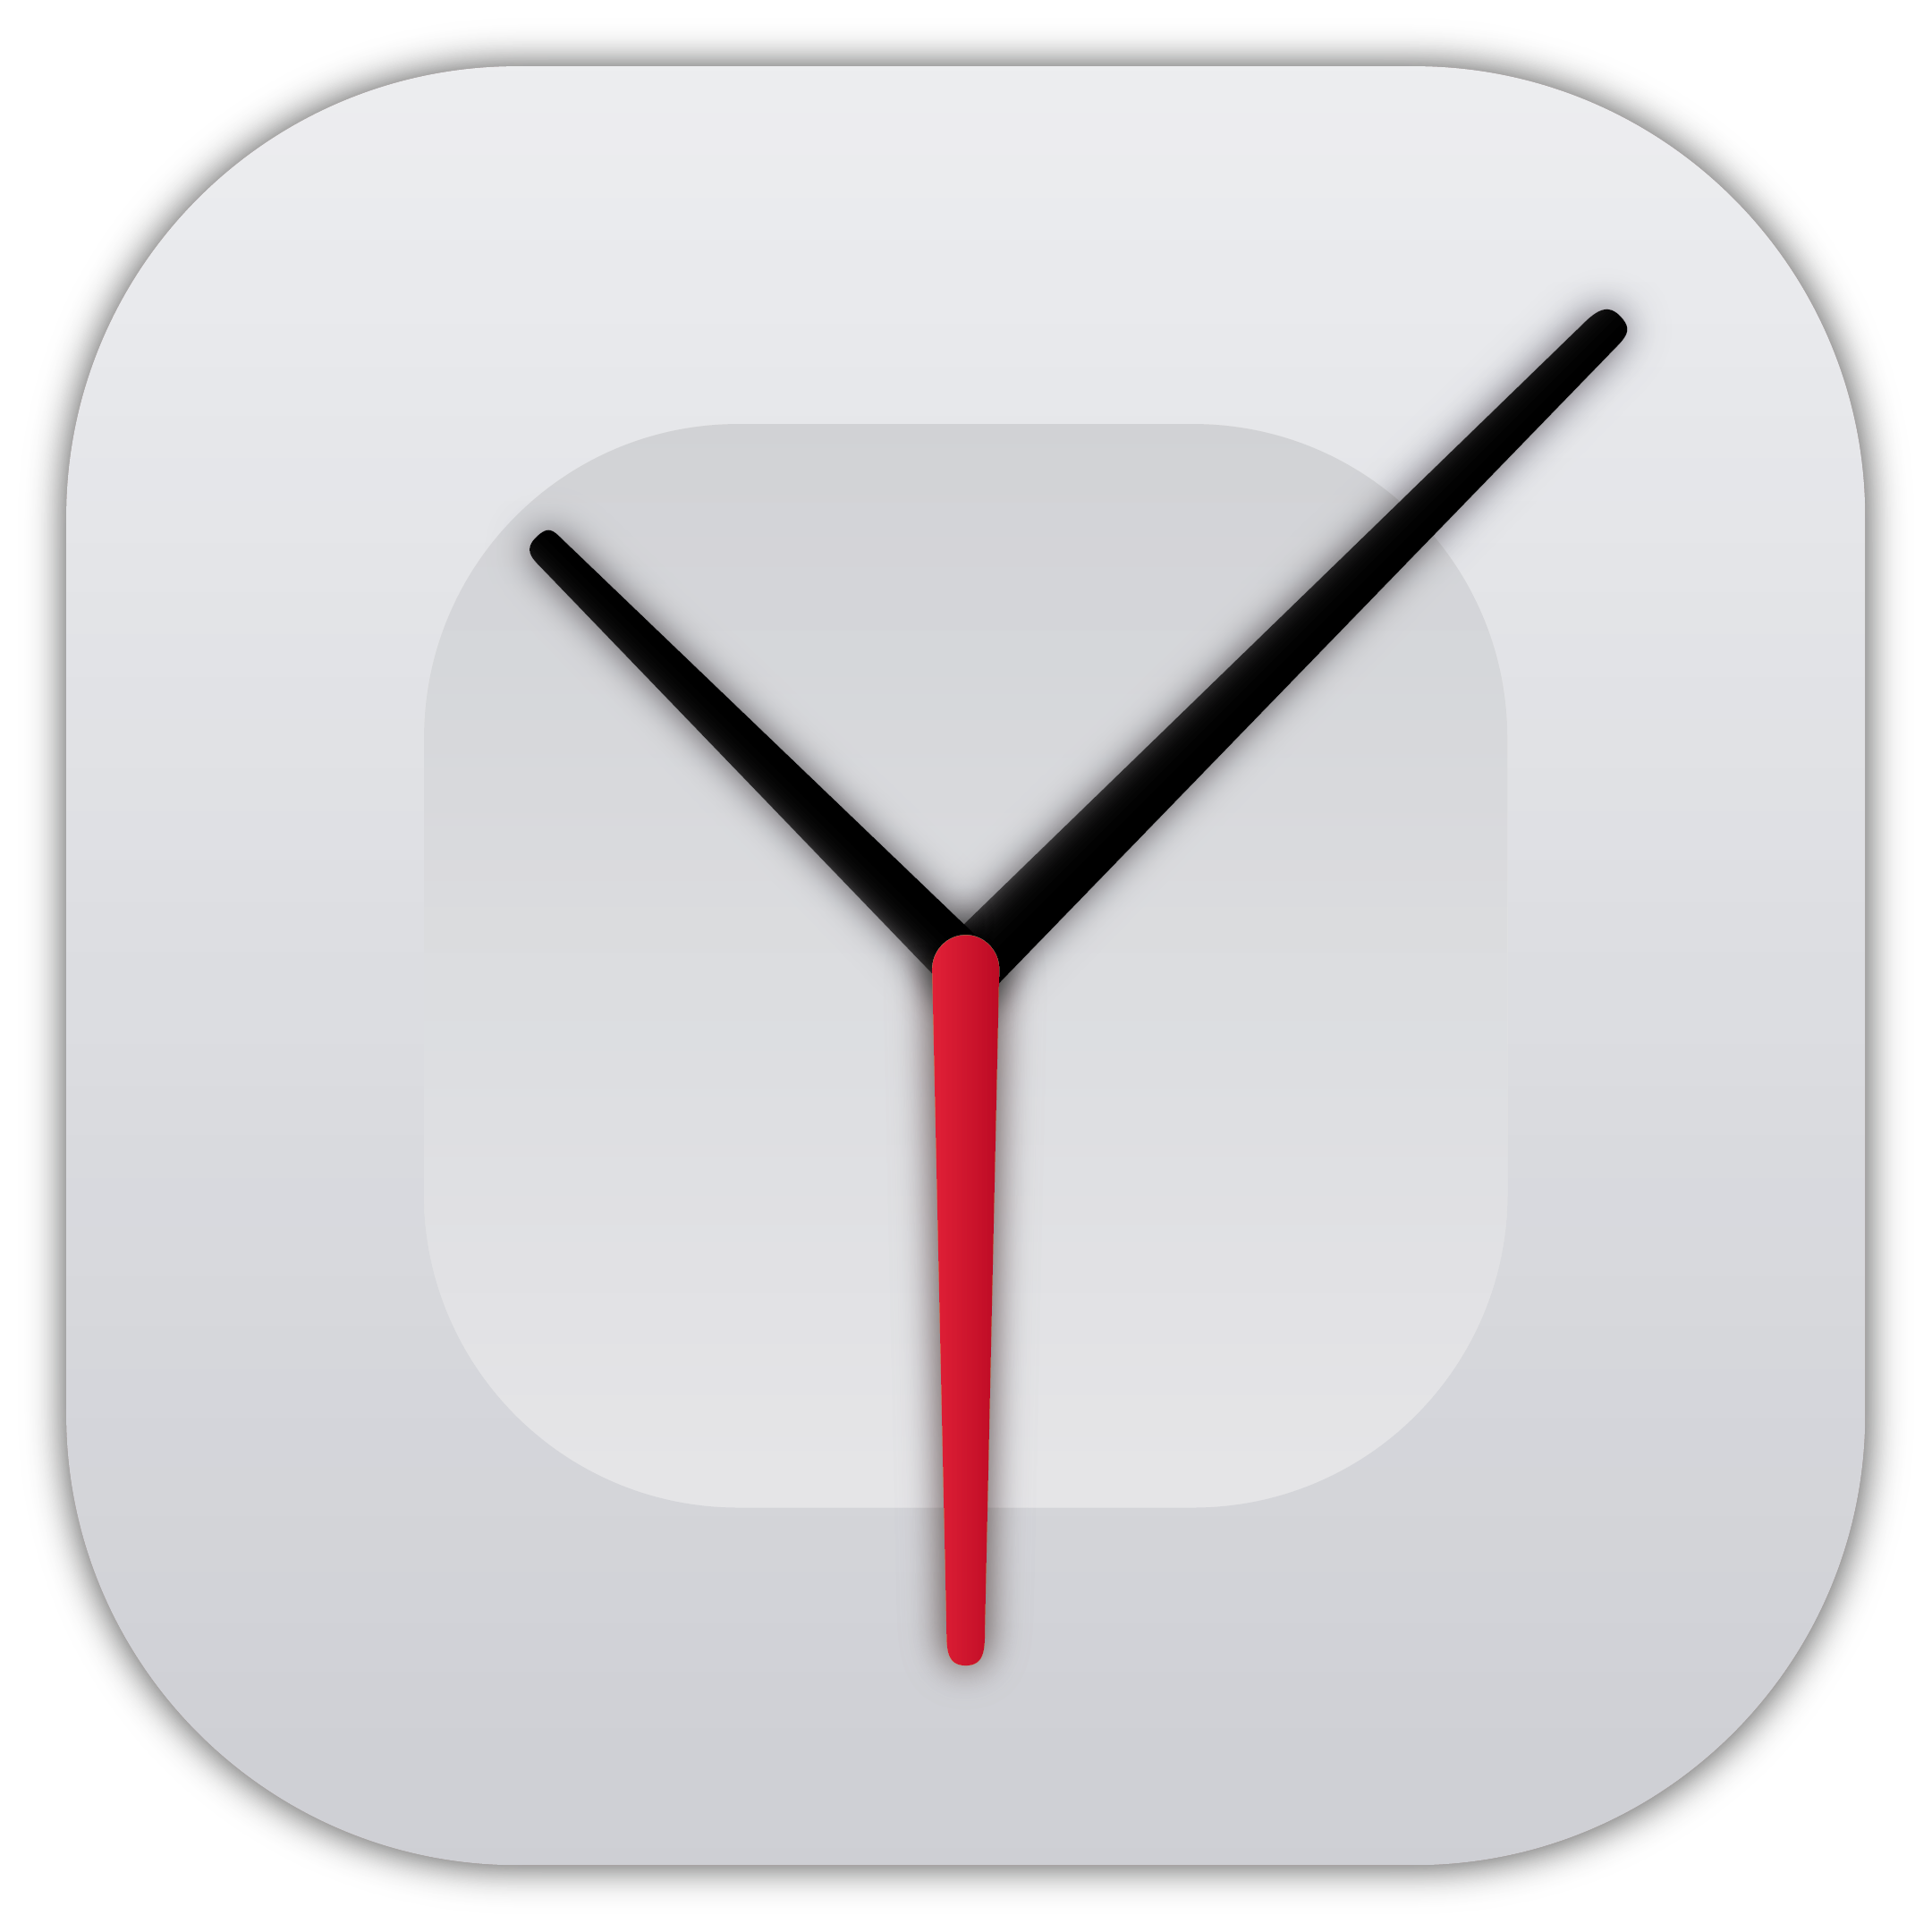 elevenclock-official-app-in-the-microsoft-store